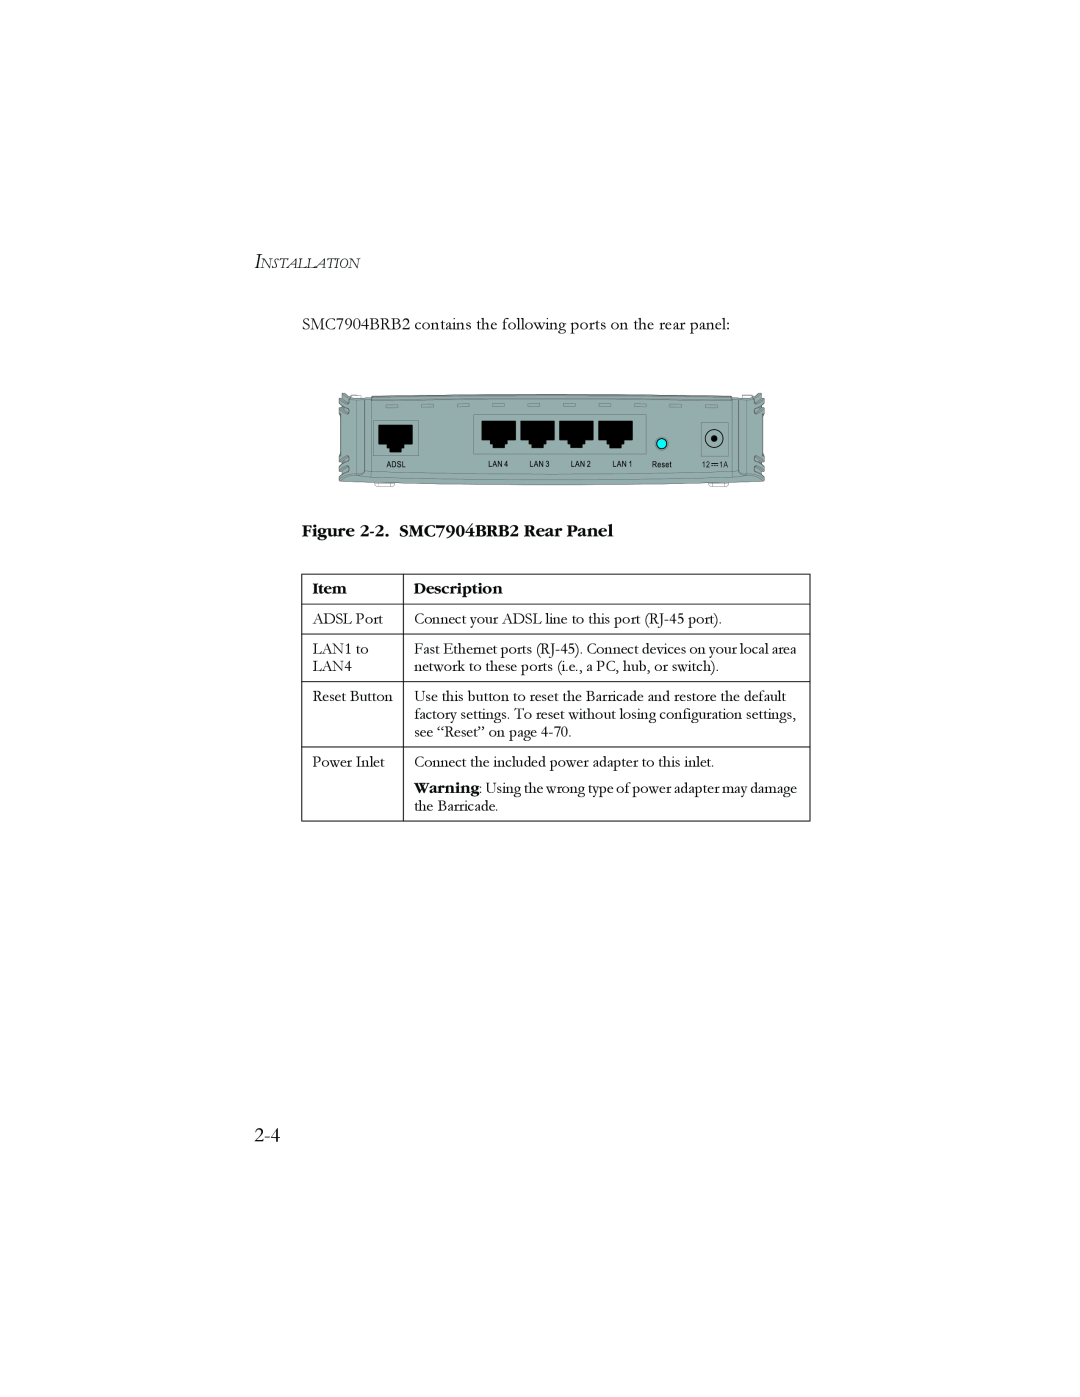 SMC Networks manual SMC7904BRB2 contains the following ports on the rear panel, 2. SMC7904BRB2 Rear Panel, Description 